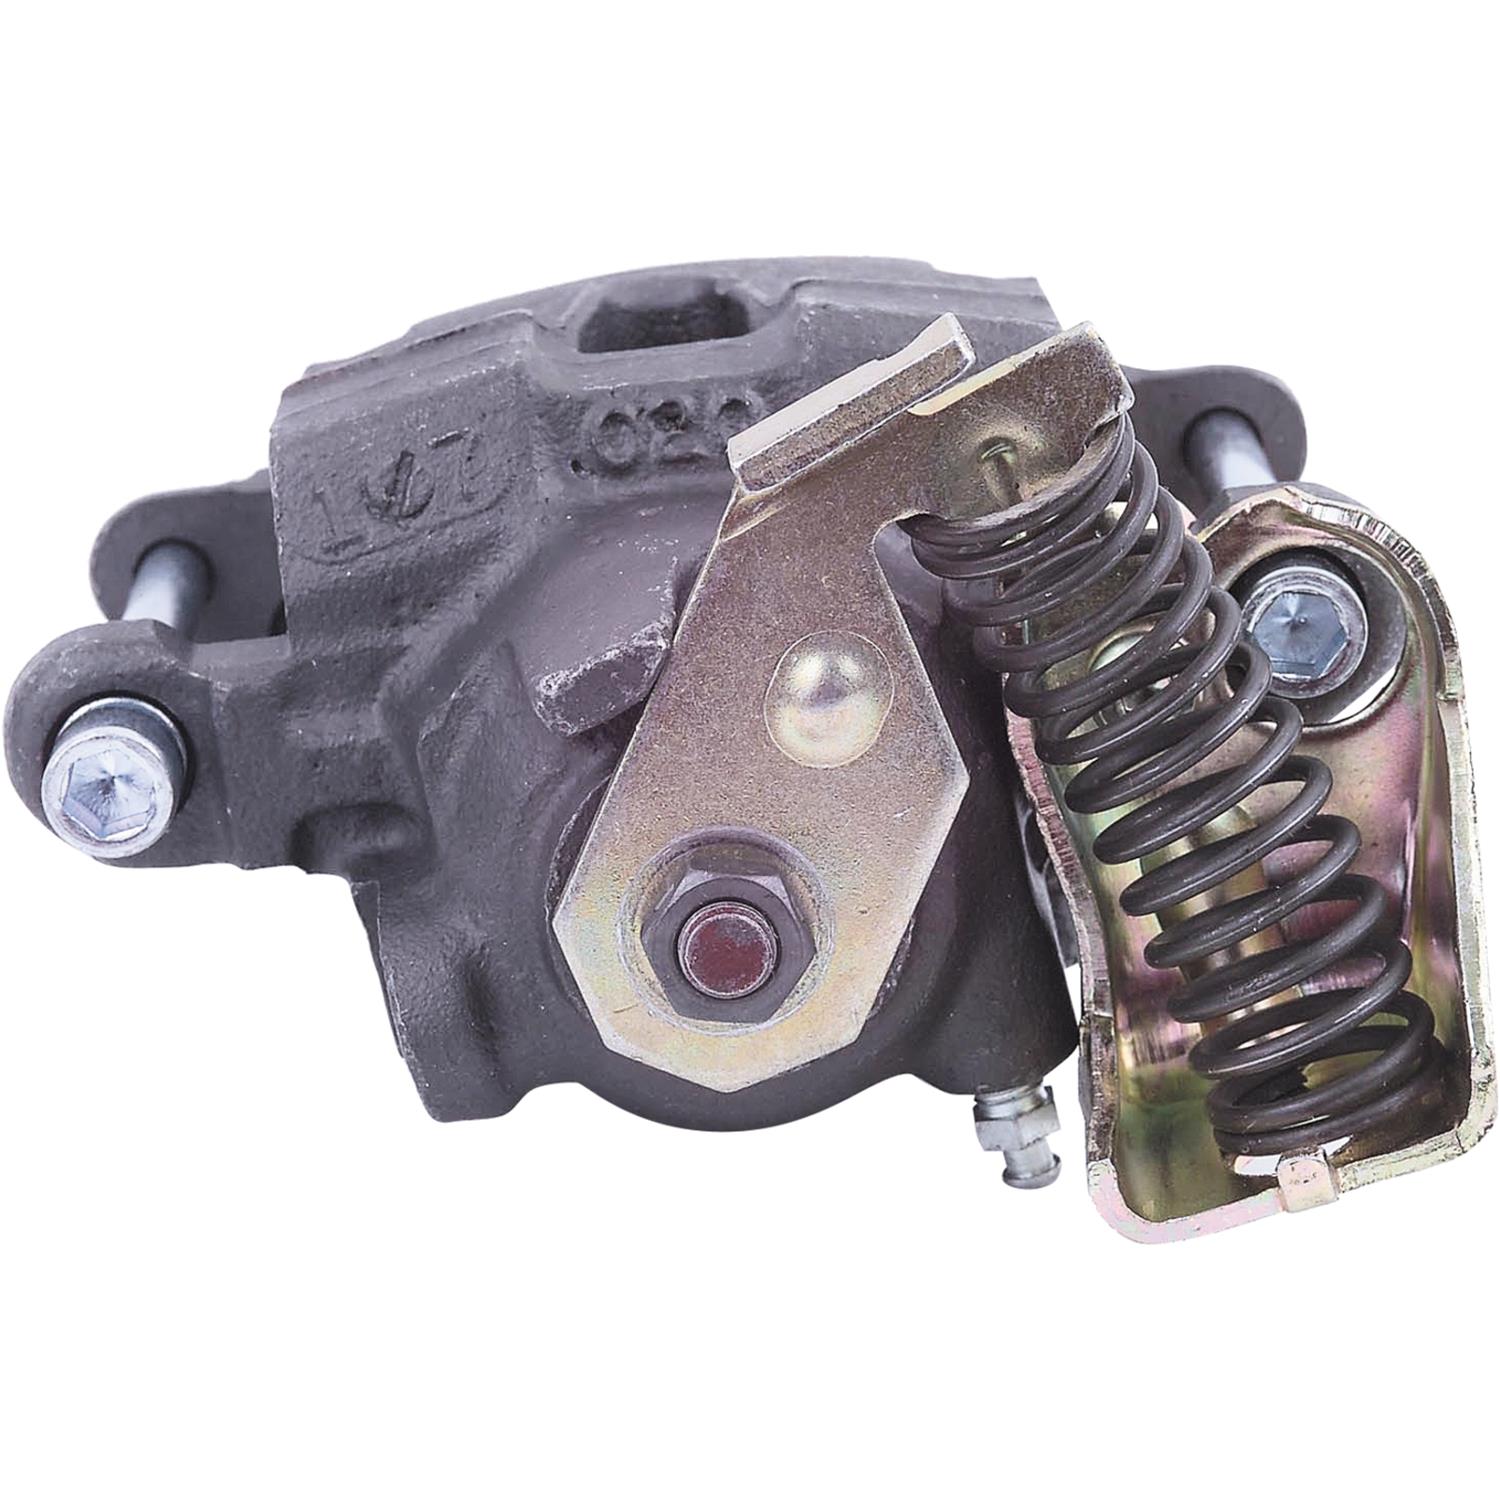 Brake Caliper Unloaded Cardone 19-2582 Remanufactured Import Friction Ready 